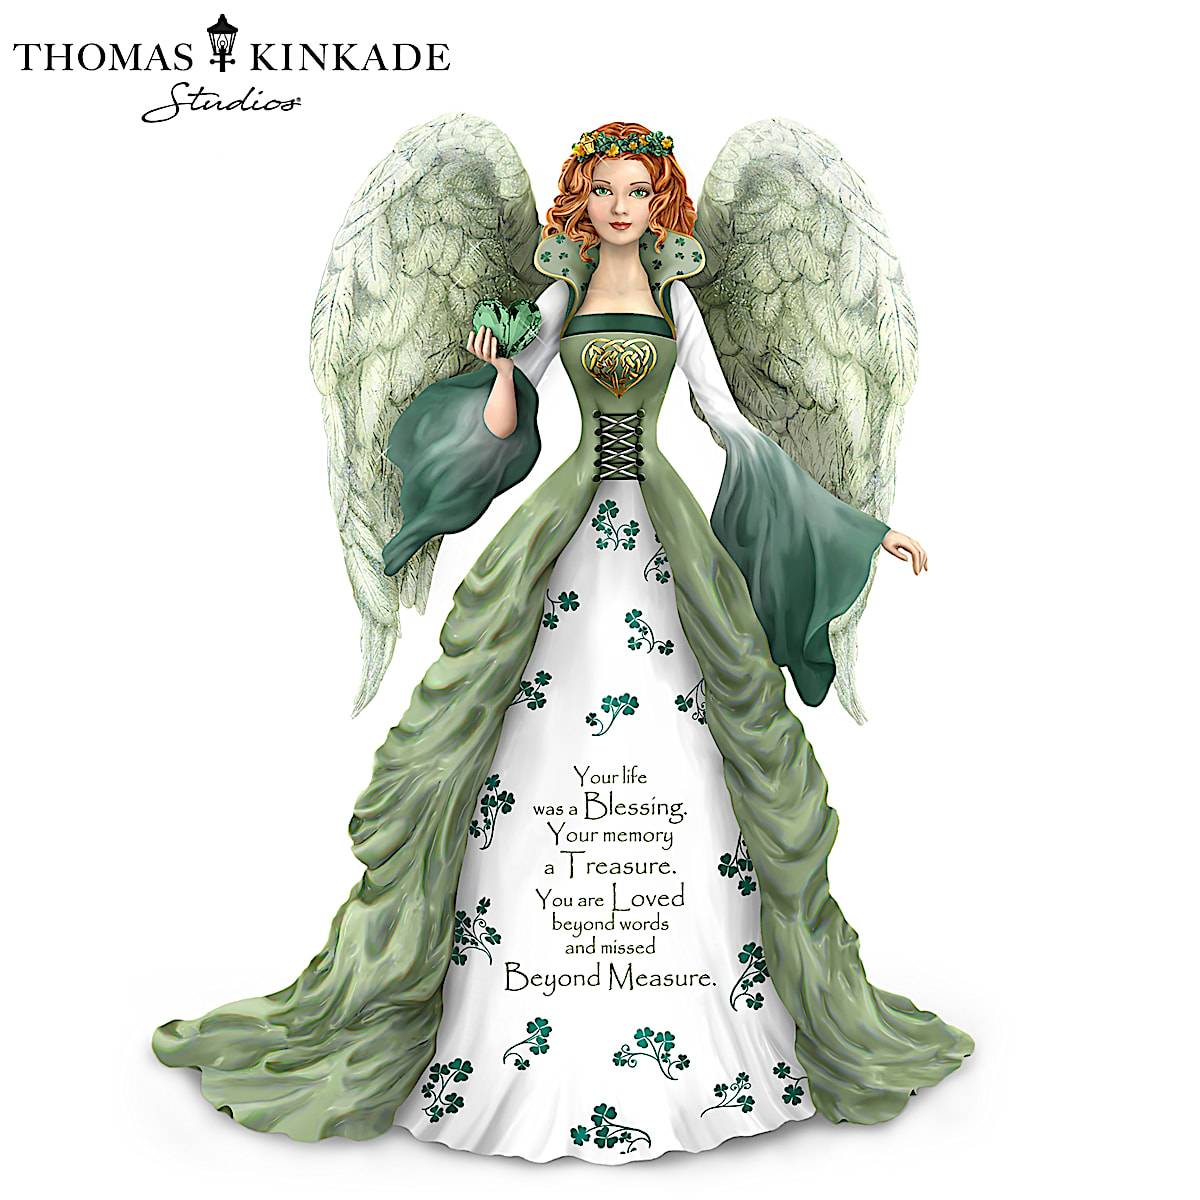 Precious Moments Angel Figurines: Wings Of Remembrance Collection